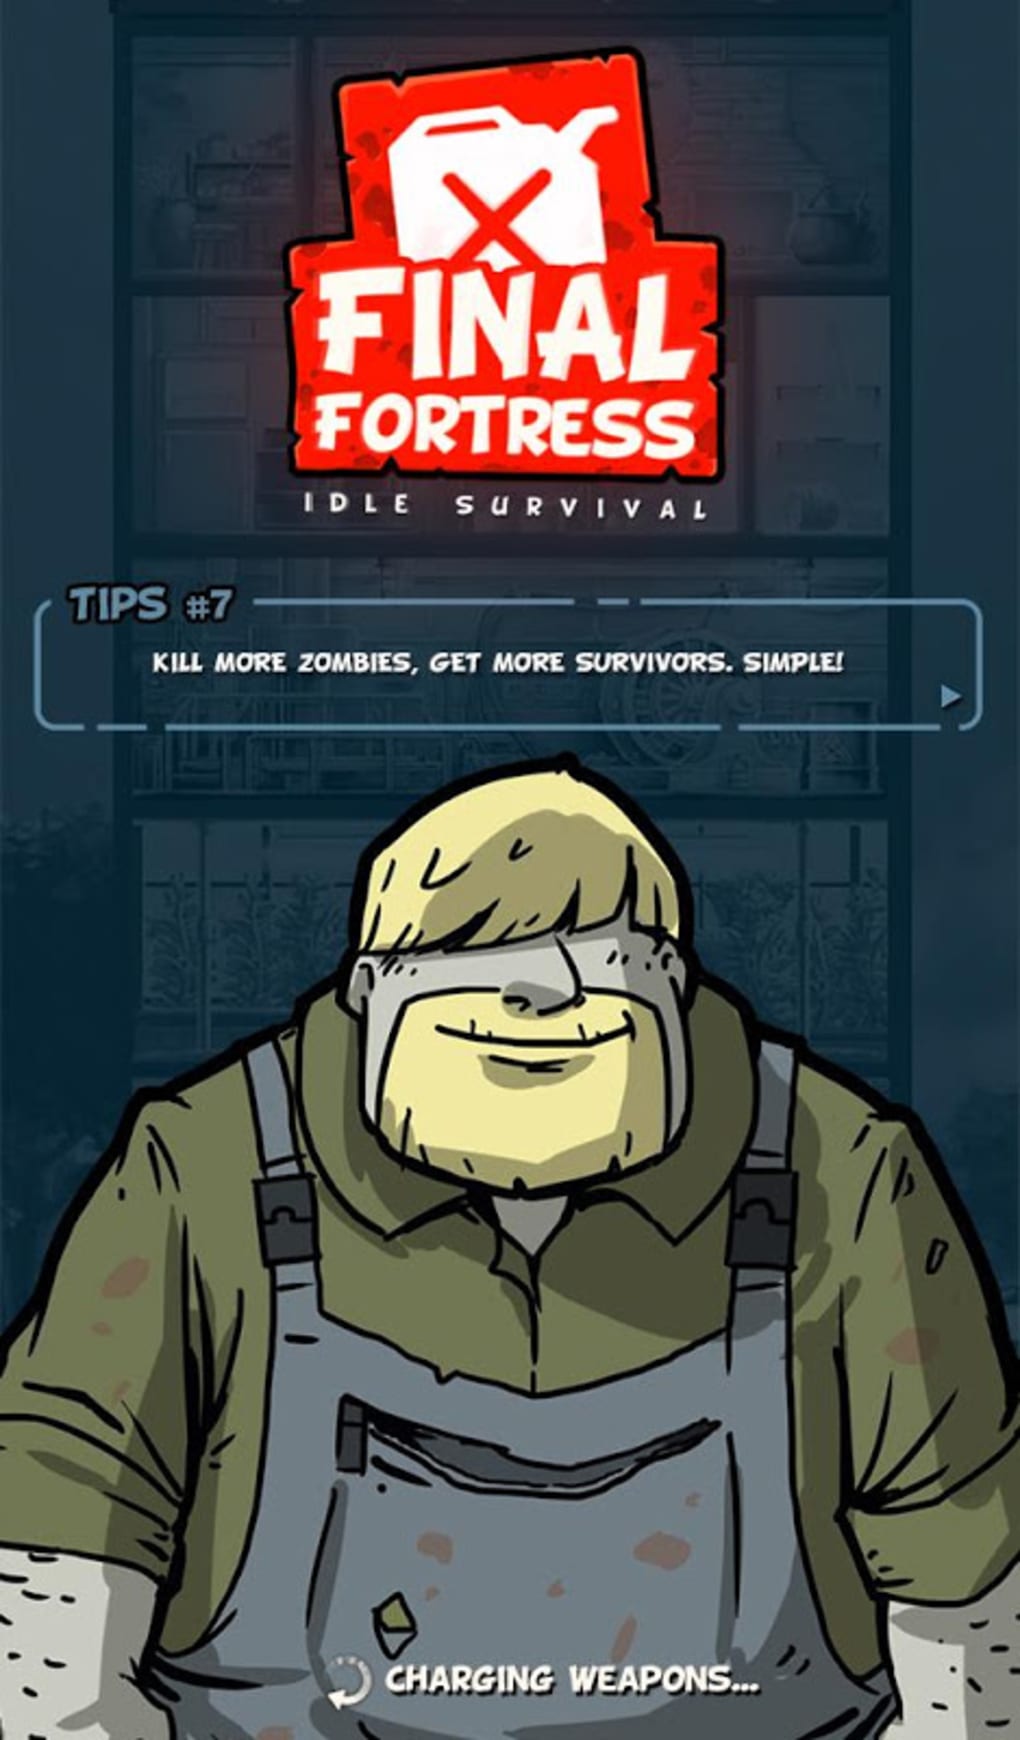 Final Fortress - Idle Survival Apk Download for Android- Latest version  2.96- com.alleylabs.finalfortress